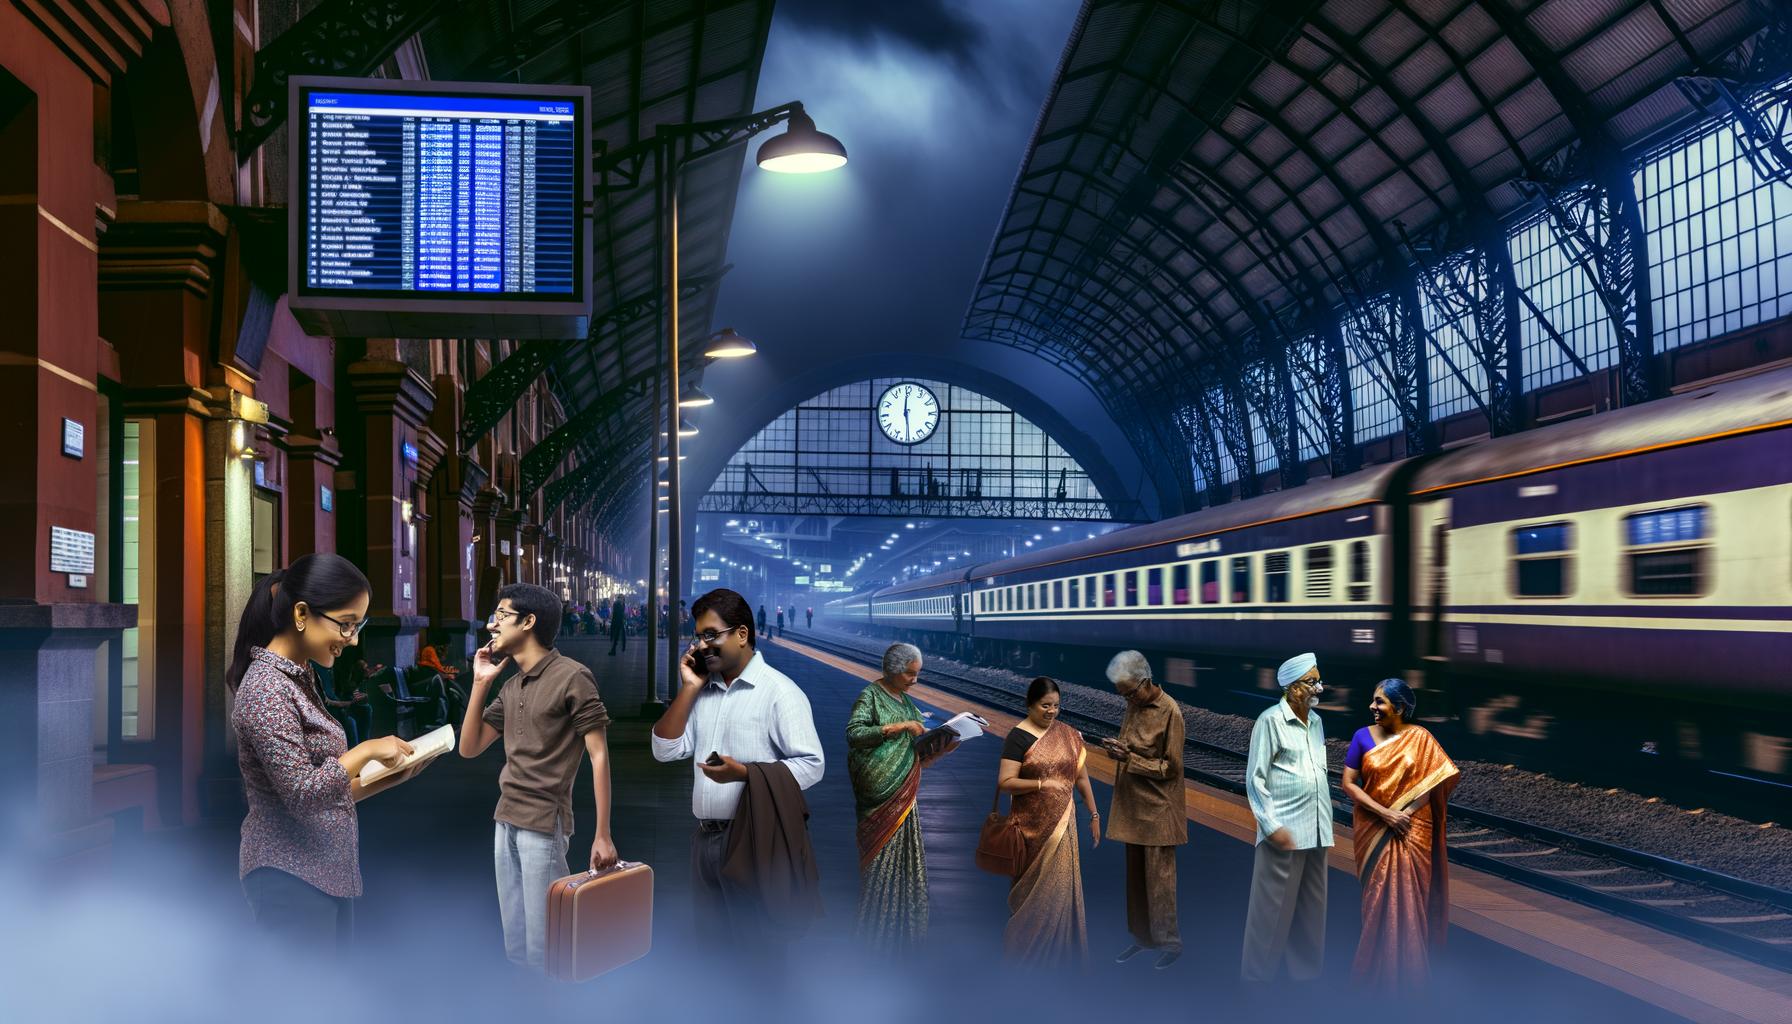 Railway stations see various incidents and developments worldwide